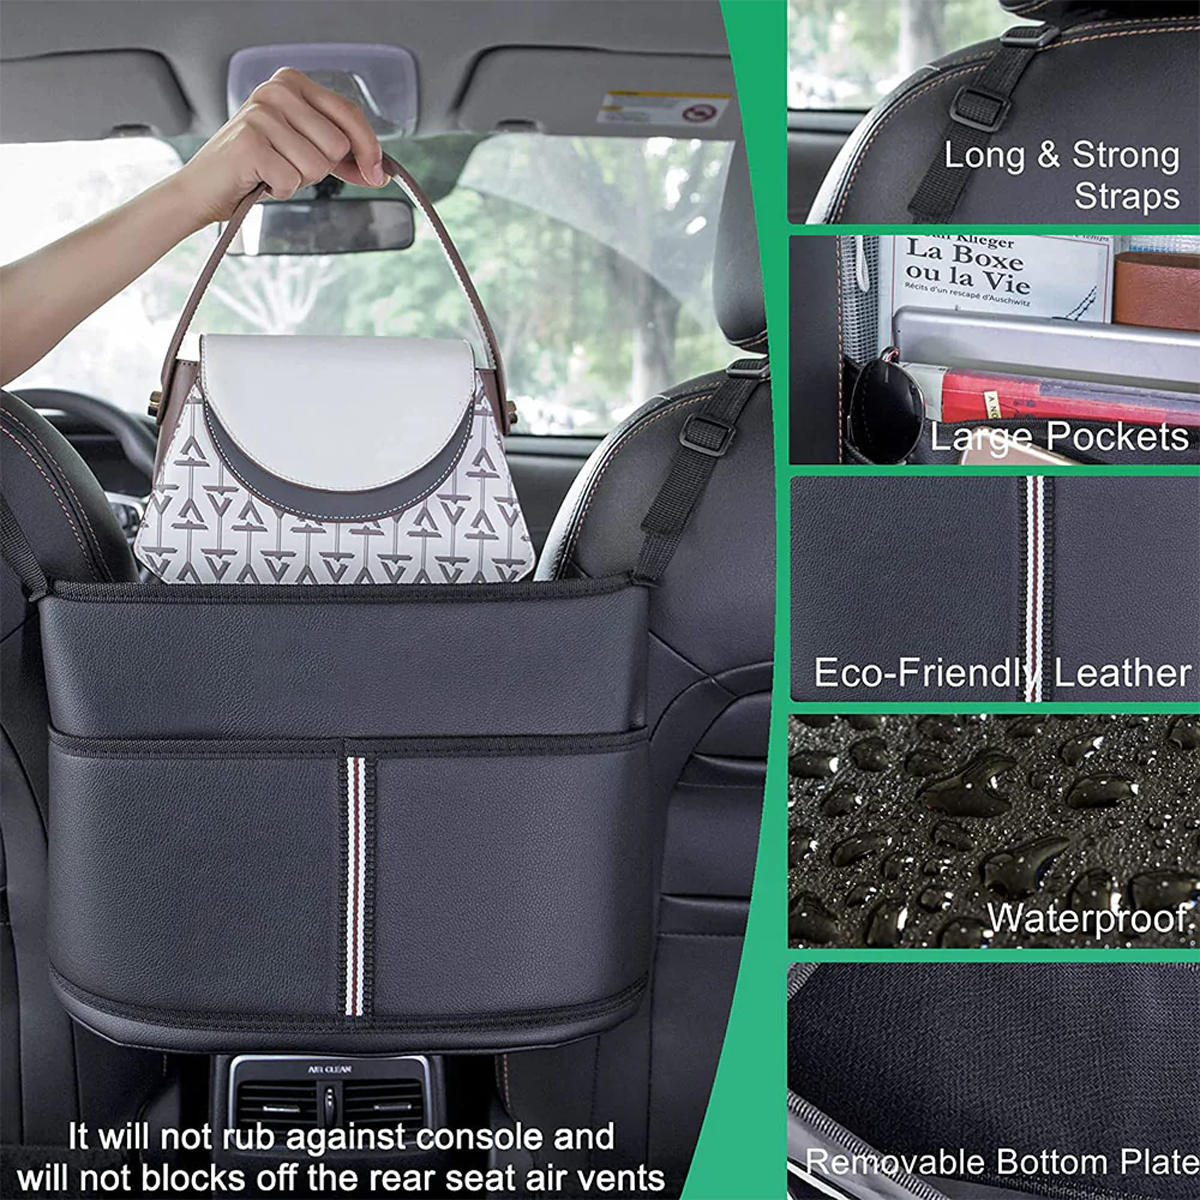 Delicate Leather Car Purse Holder: Keep Your Bag Secure and Accessible on  the Go